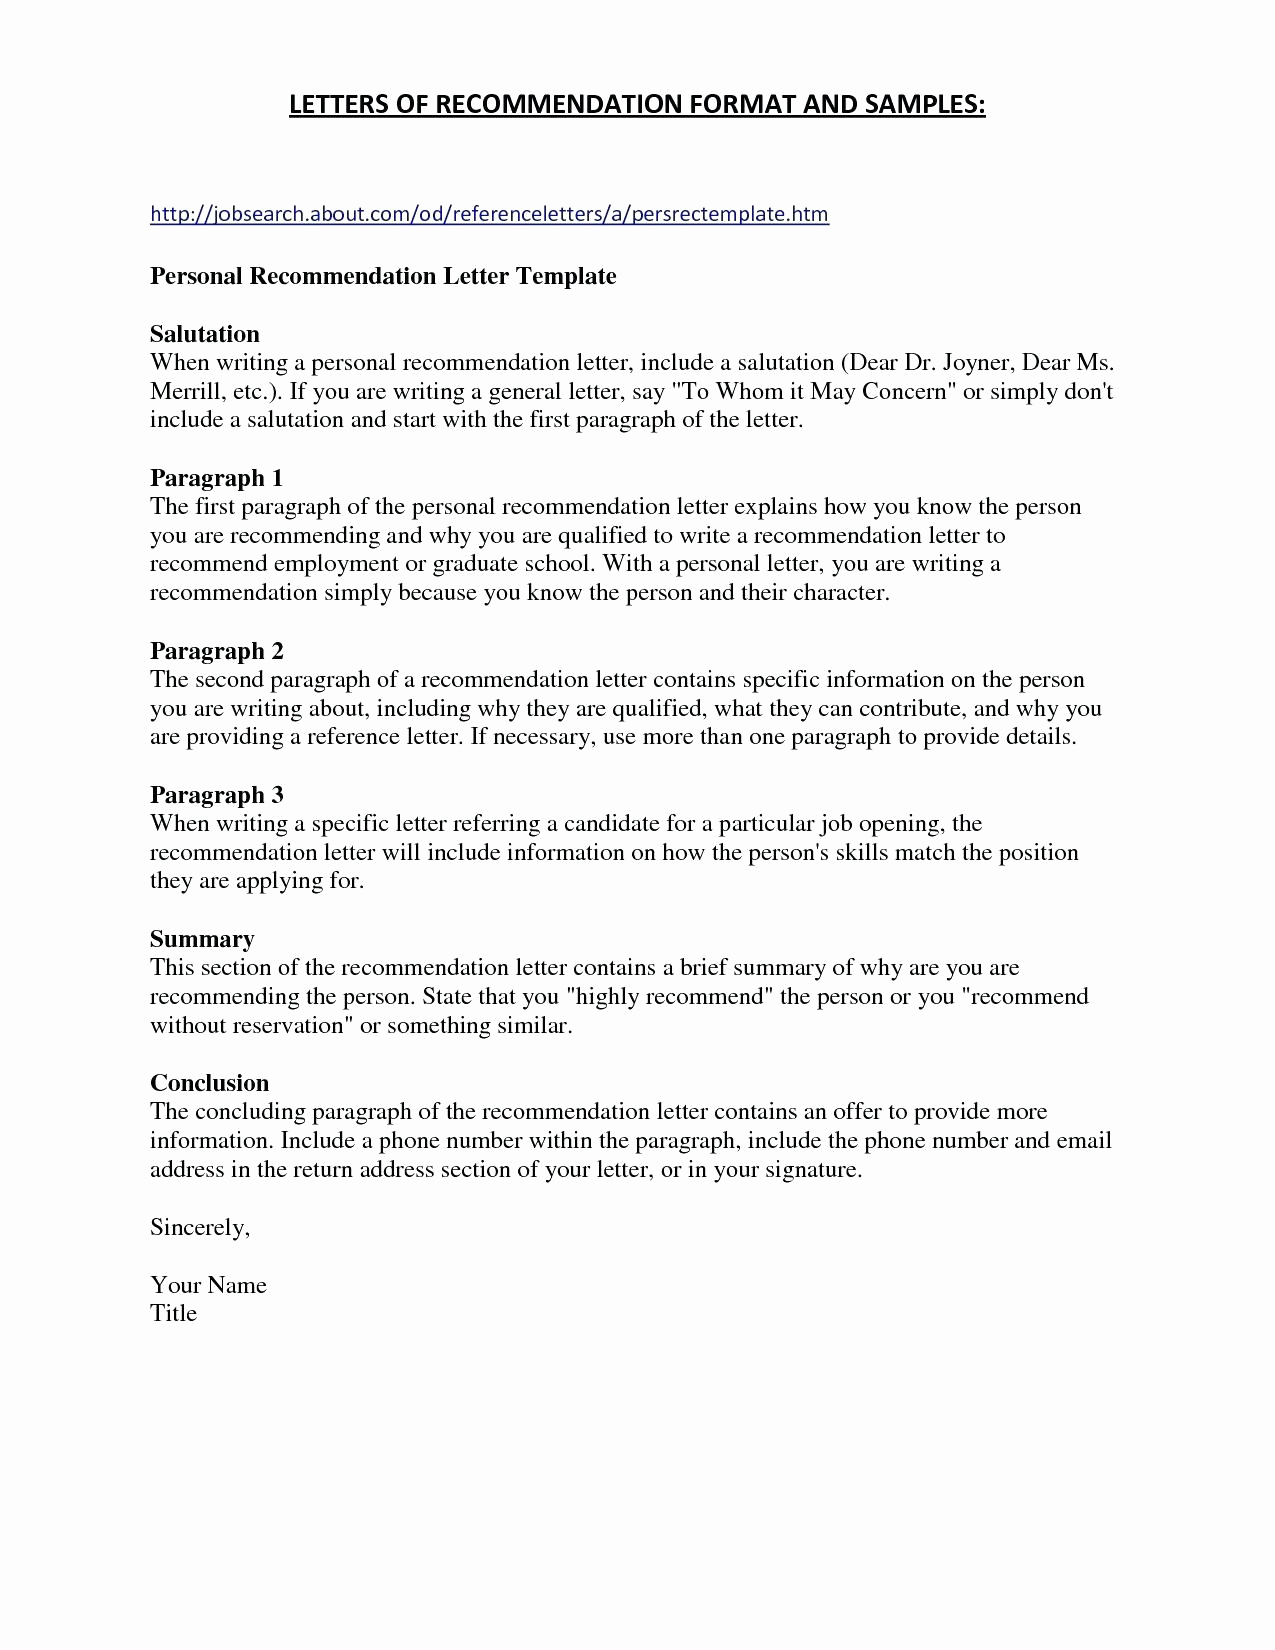 Business Contract Termination Letter Template - Business Contract Termination Letter Lovely Lovely Business Contract